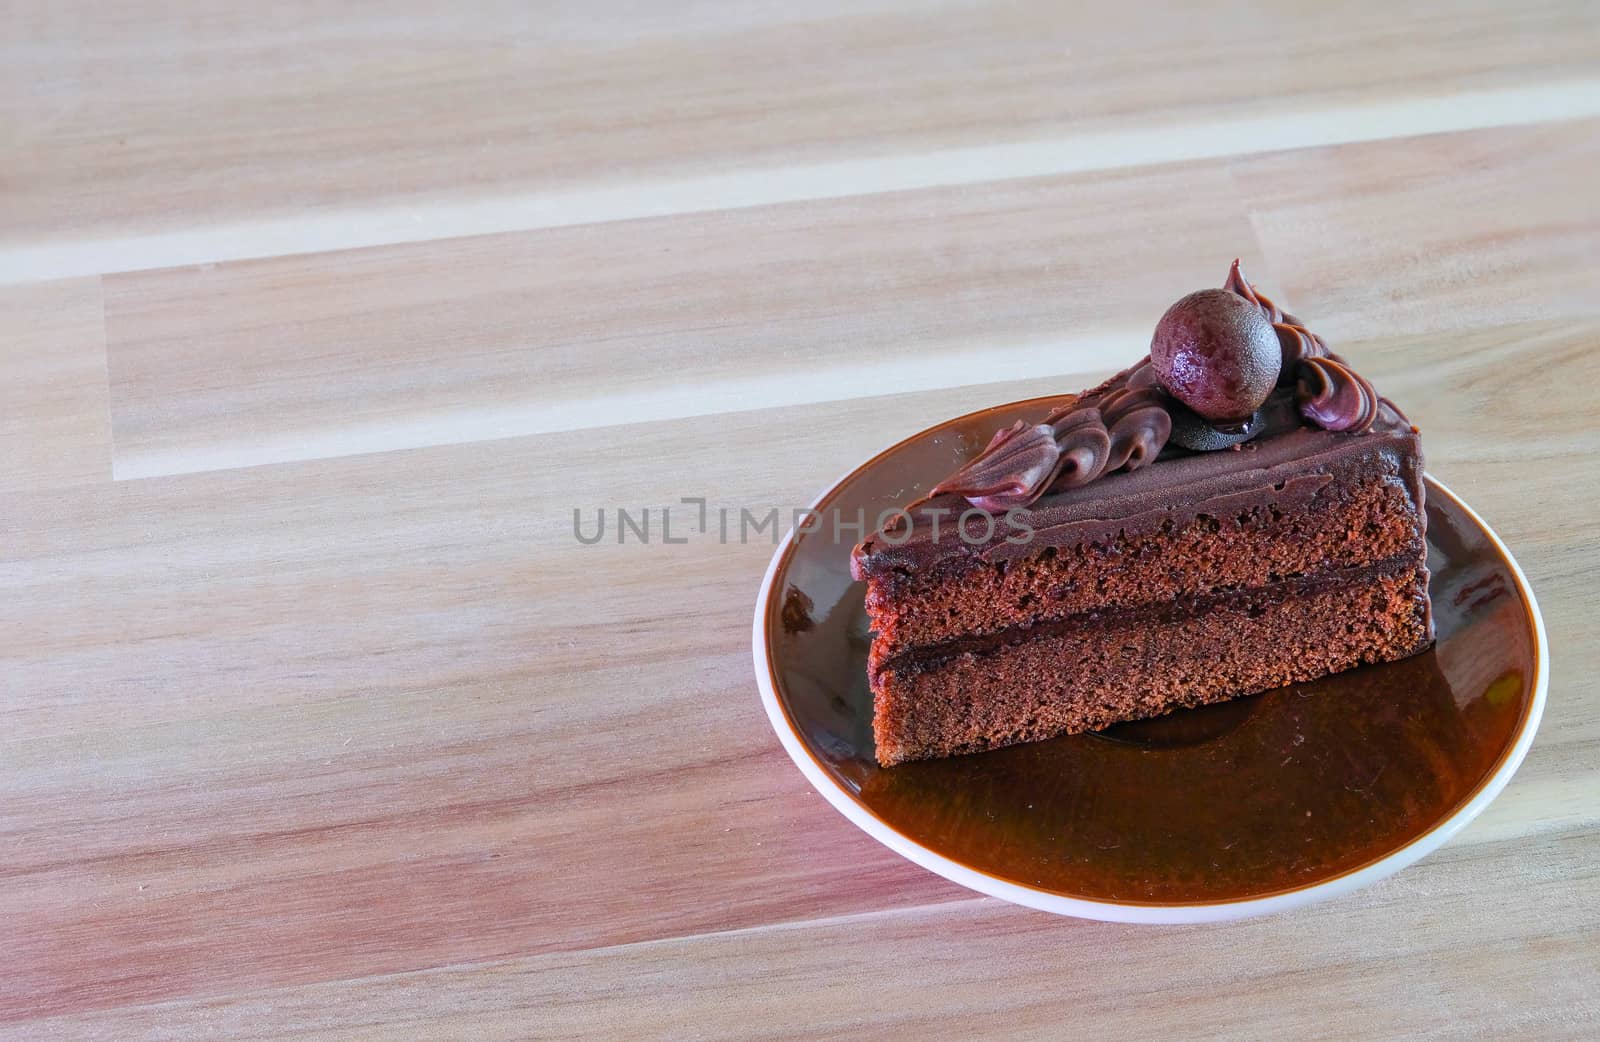 the chocolate cake on wooden table by Bonn2210